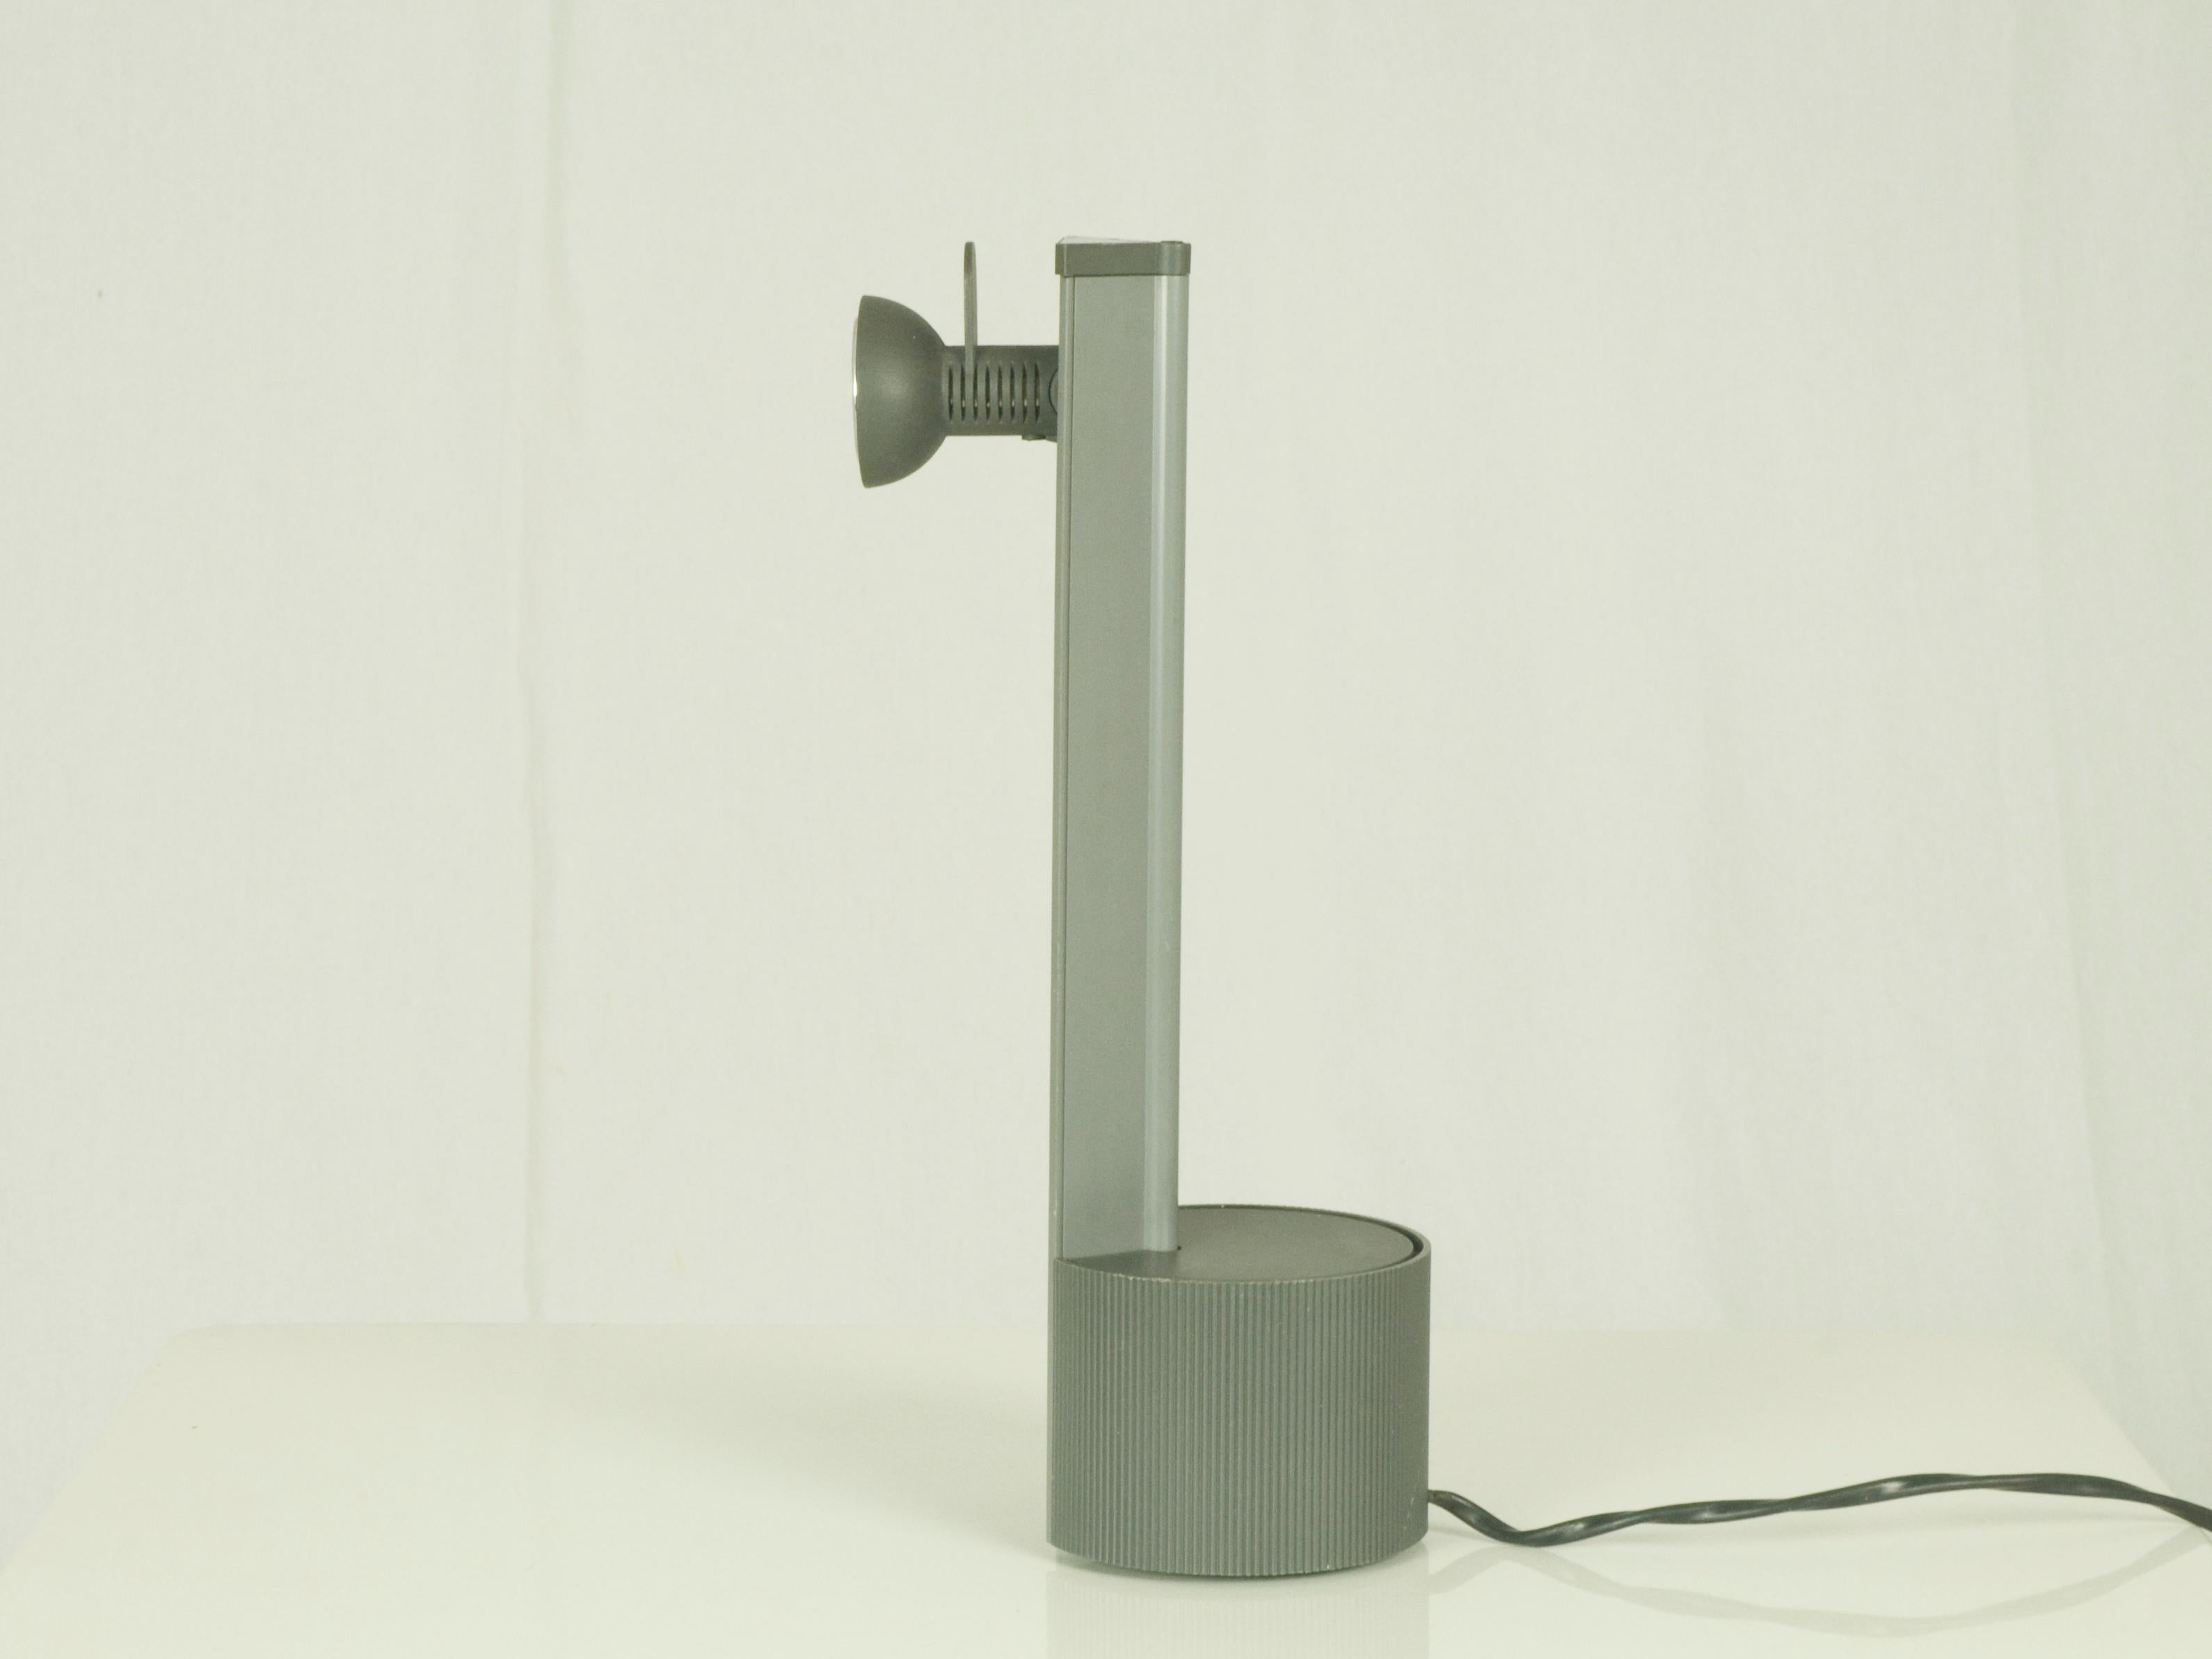 Post-Modern Colibrì Table Lamp by Albini, Helg, Piva for Sirrah, 1983 For Sale